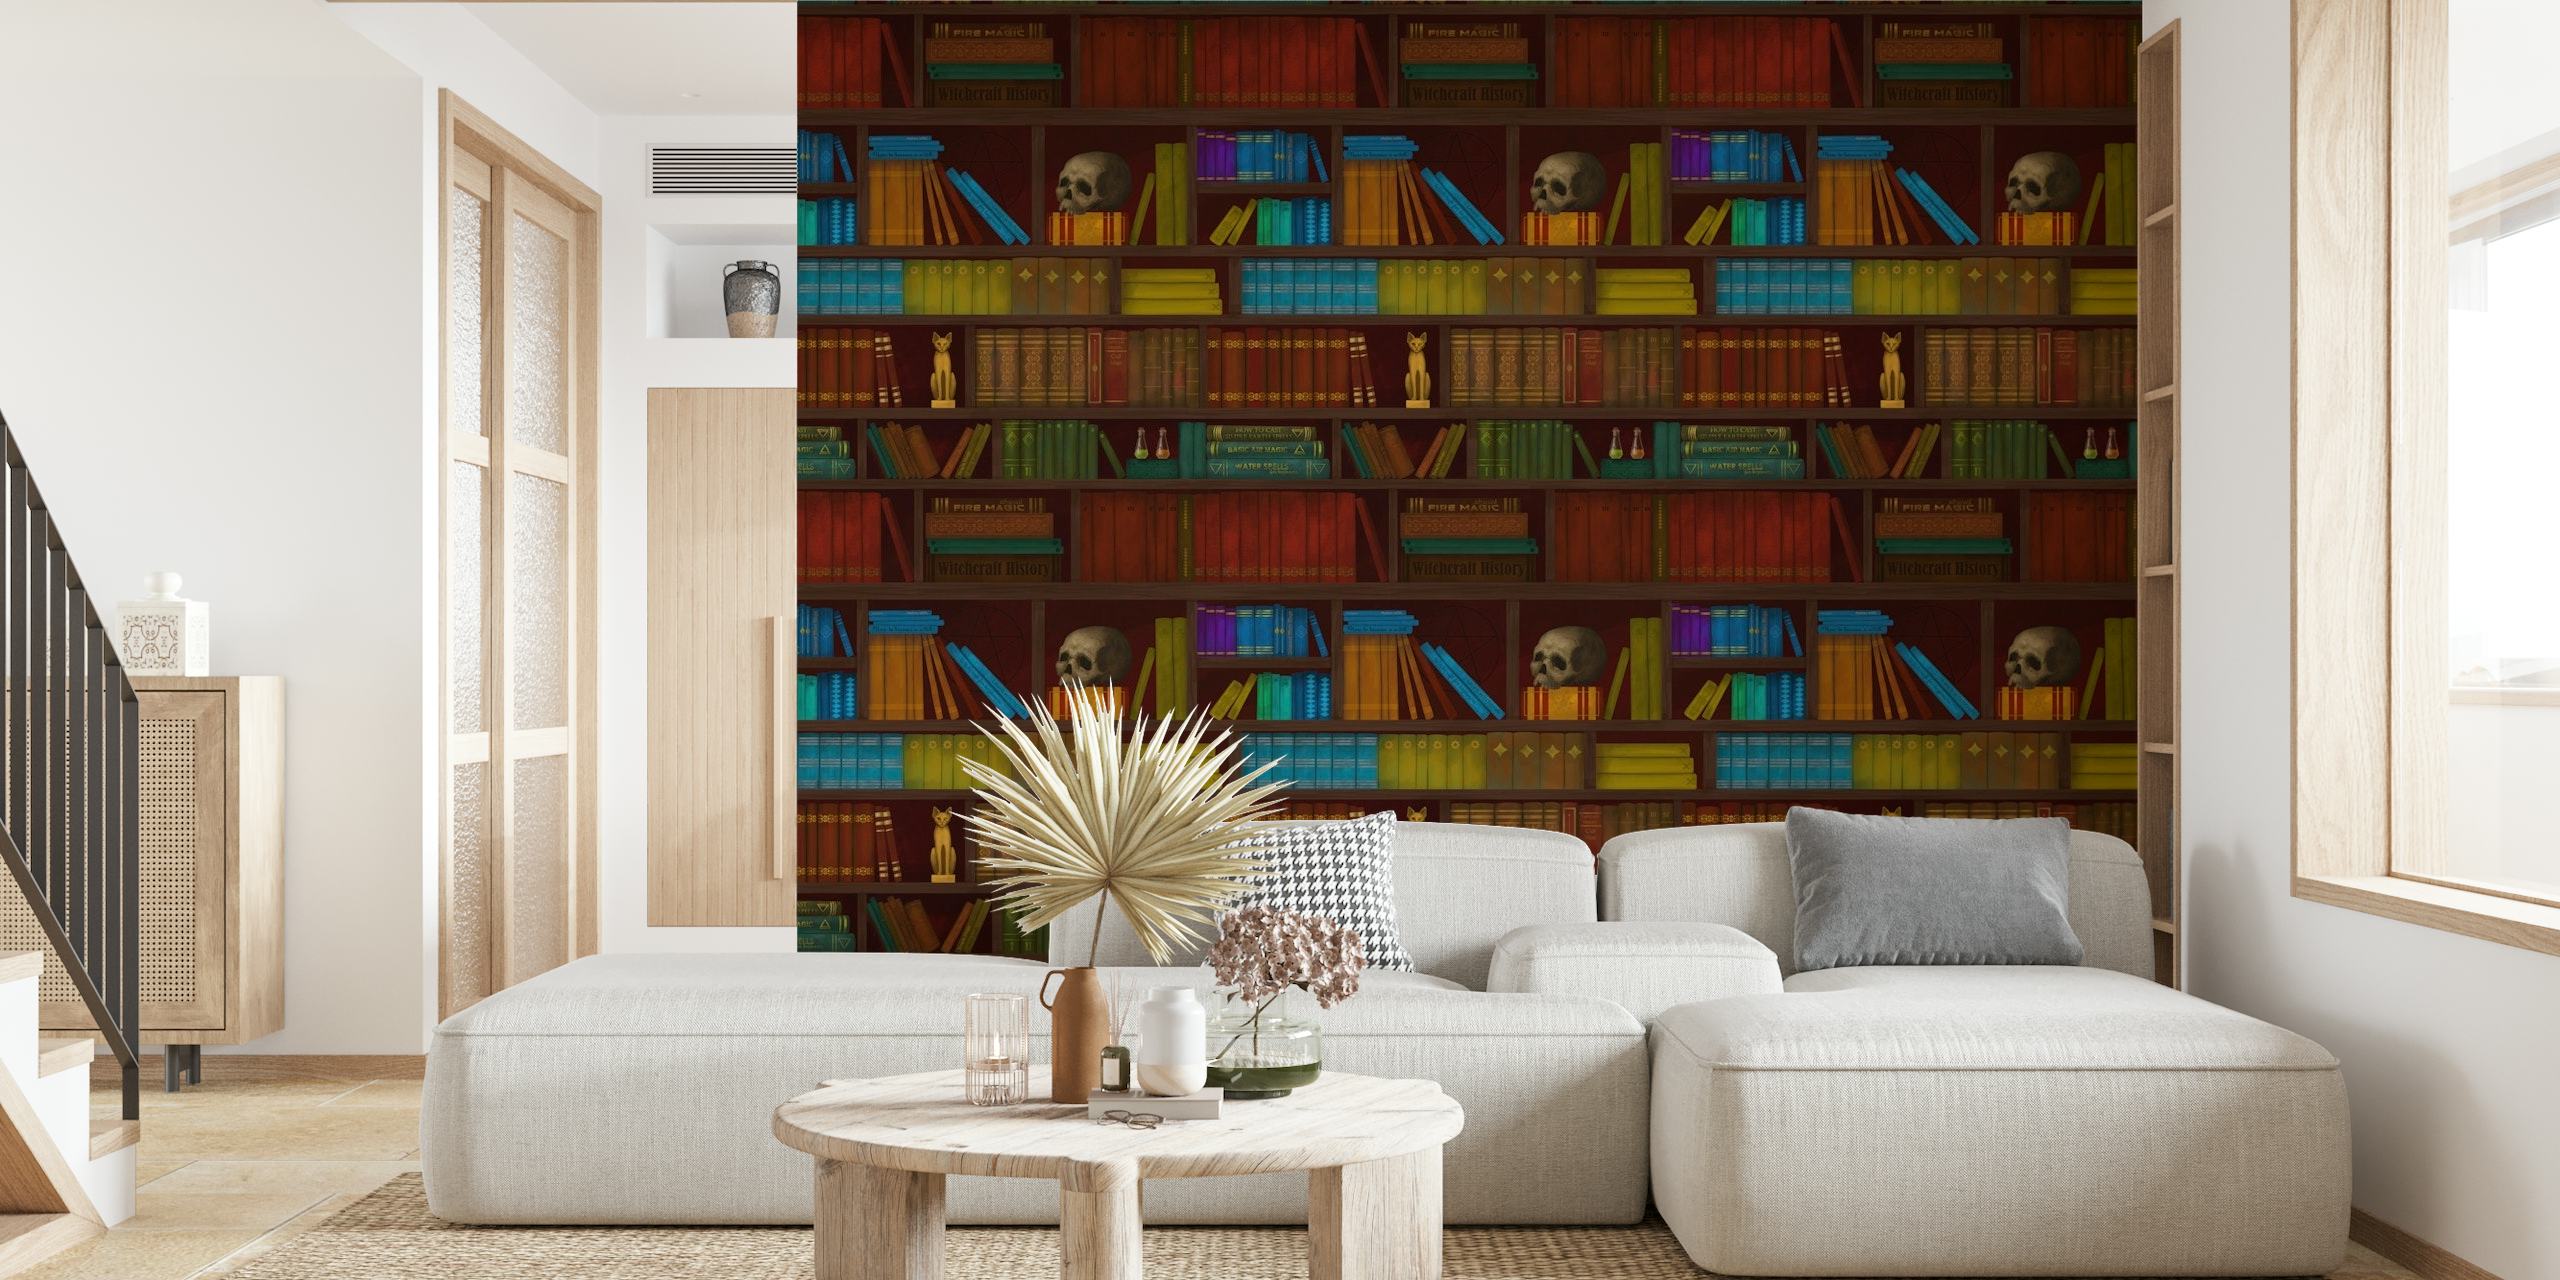 Vintage-style Dark Academia-inspired wall mural with bookshelves and artifacts